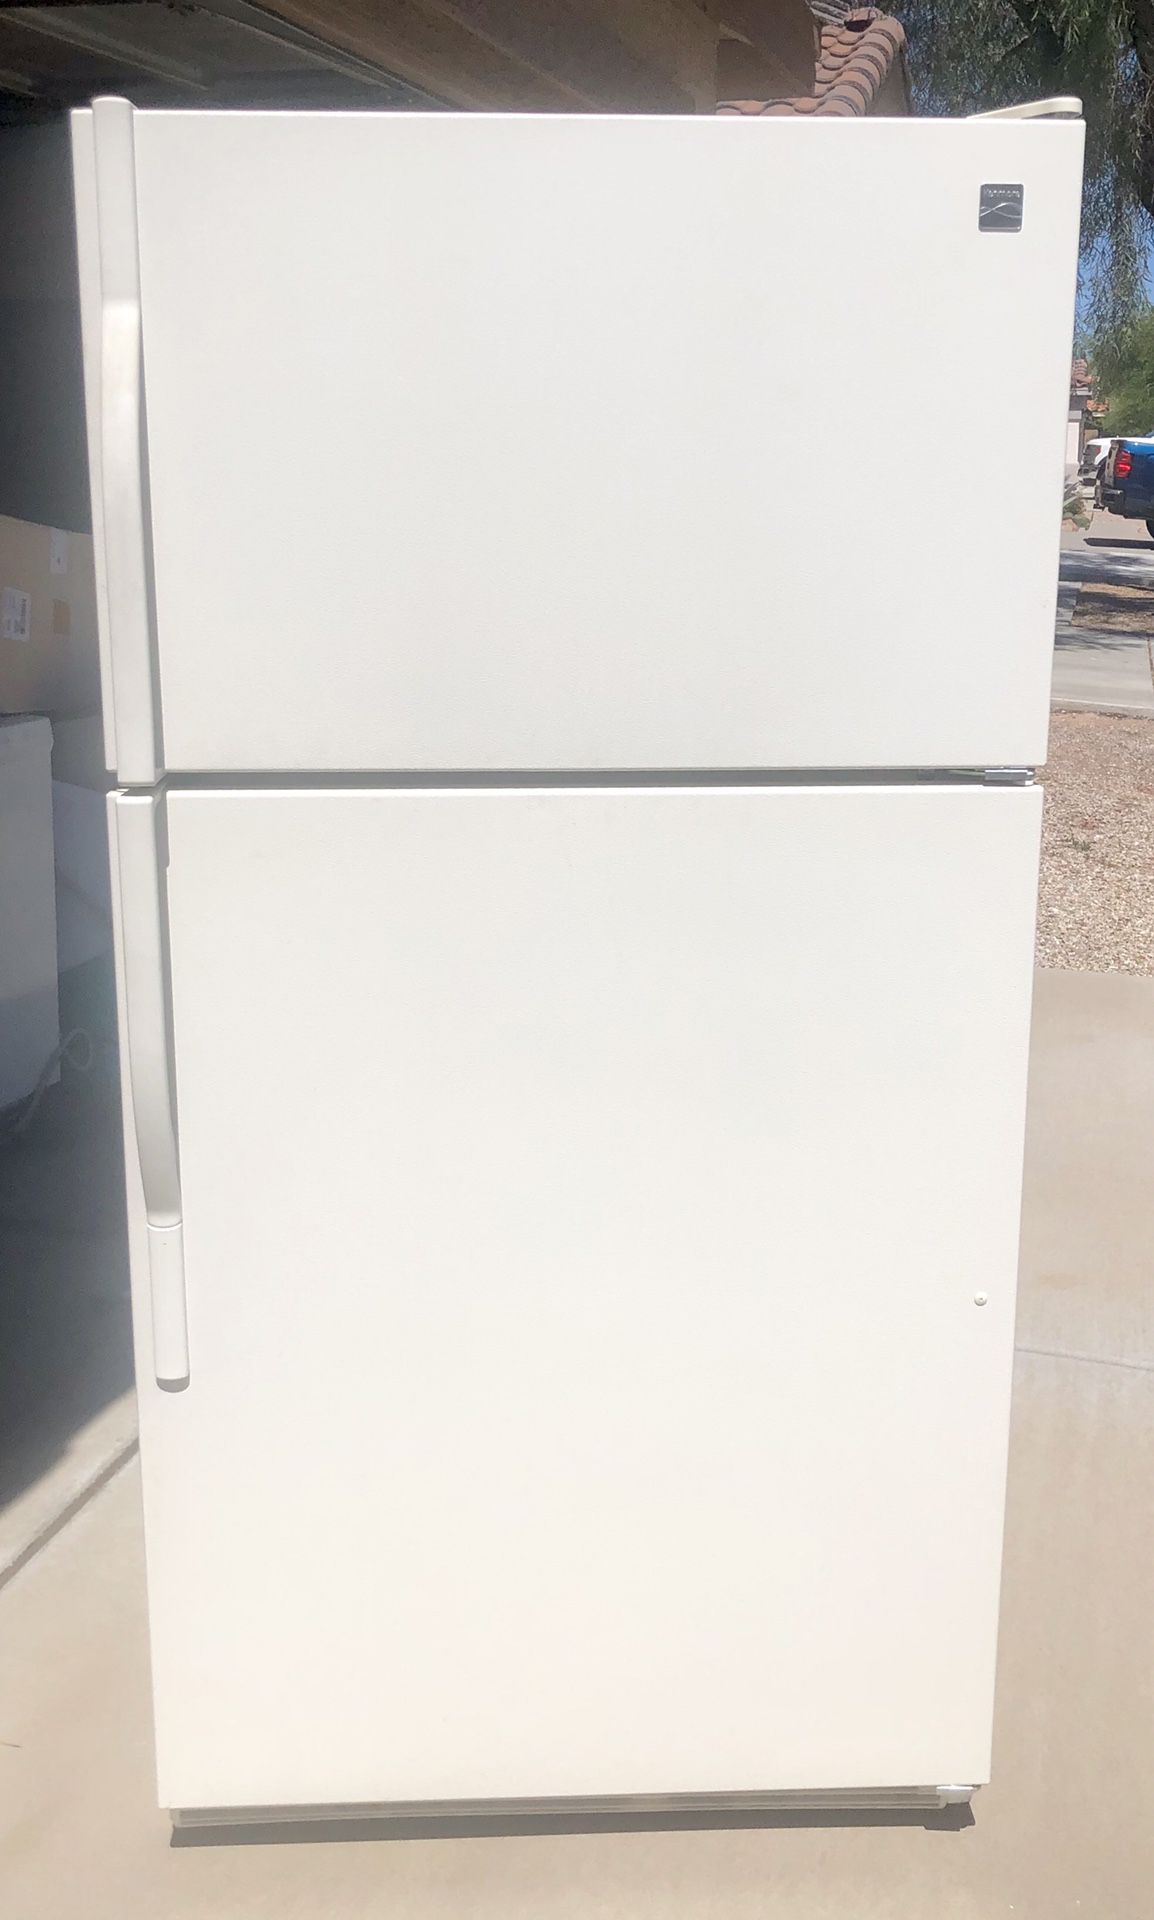 Kenmore Refrigerator and Top Freezer 21.0 cubic feet